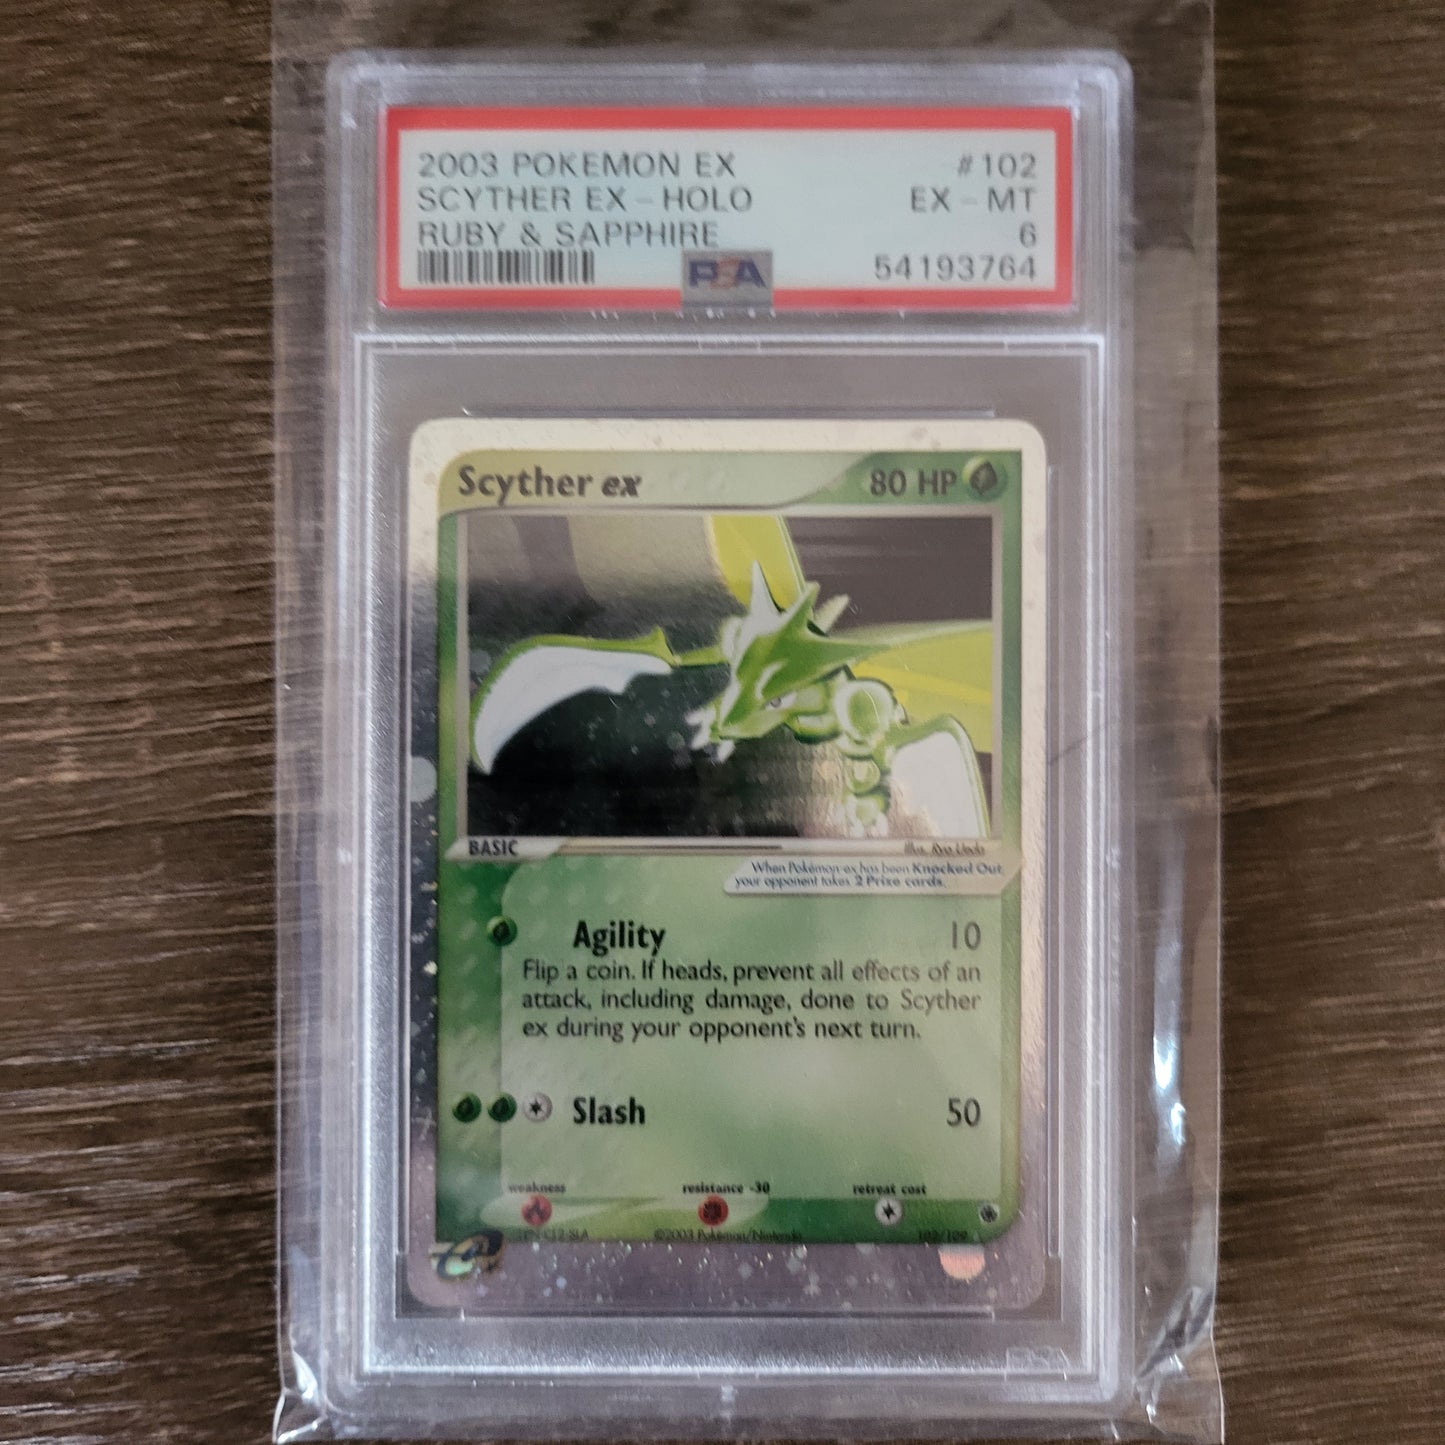 PSA 6 Scyther EX (2003) Holo Ryby and Saphire